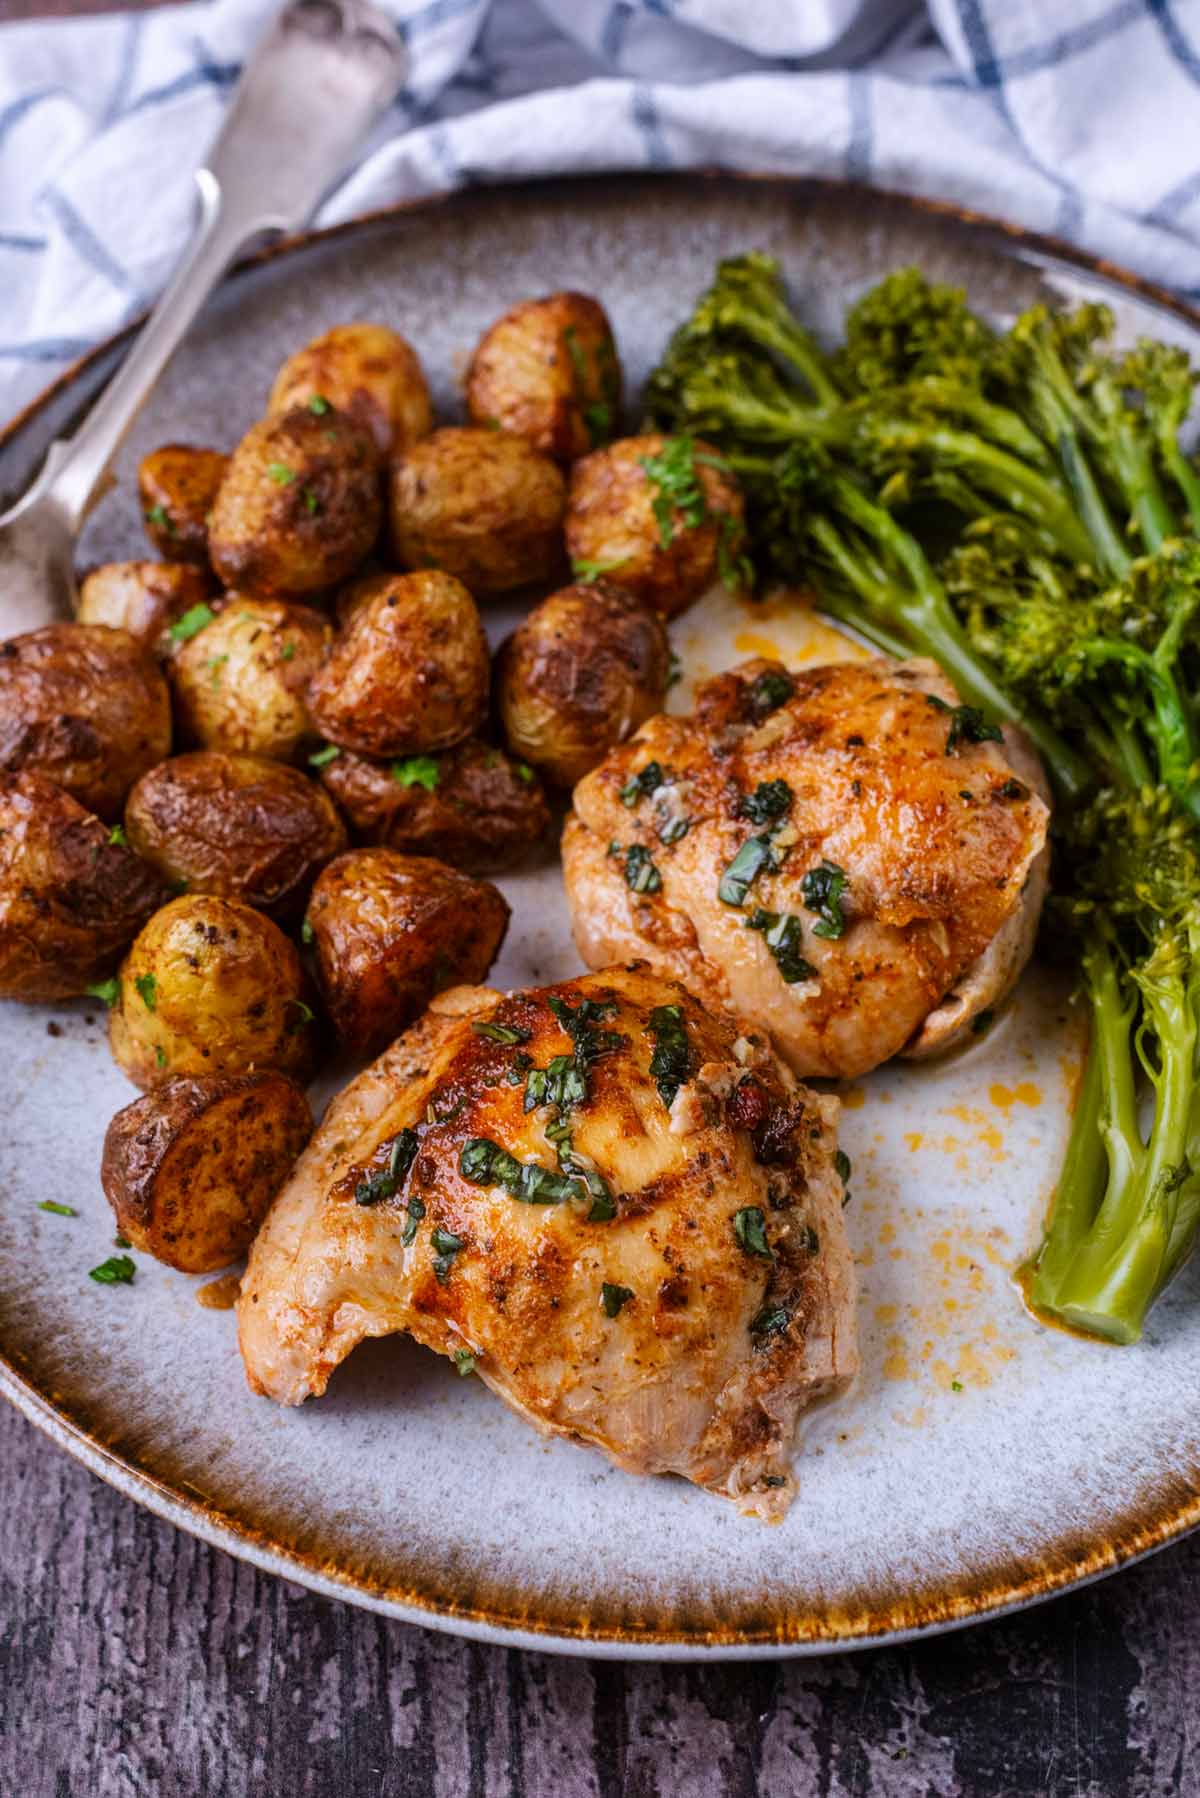 A plate of cooked chicken thighs, new potatoes and tenderstem broccoli.